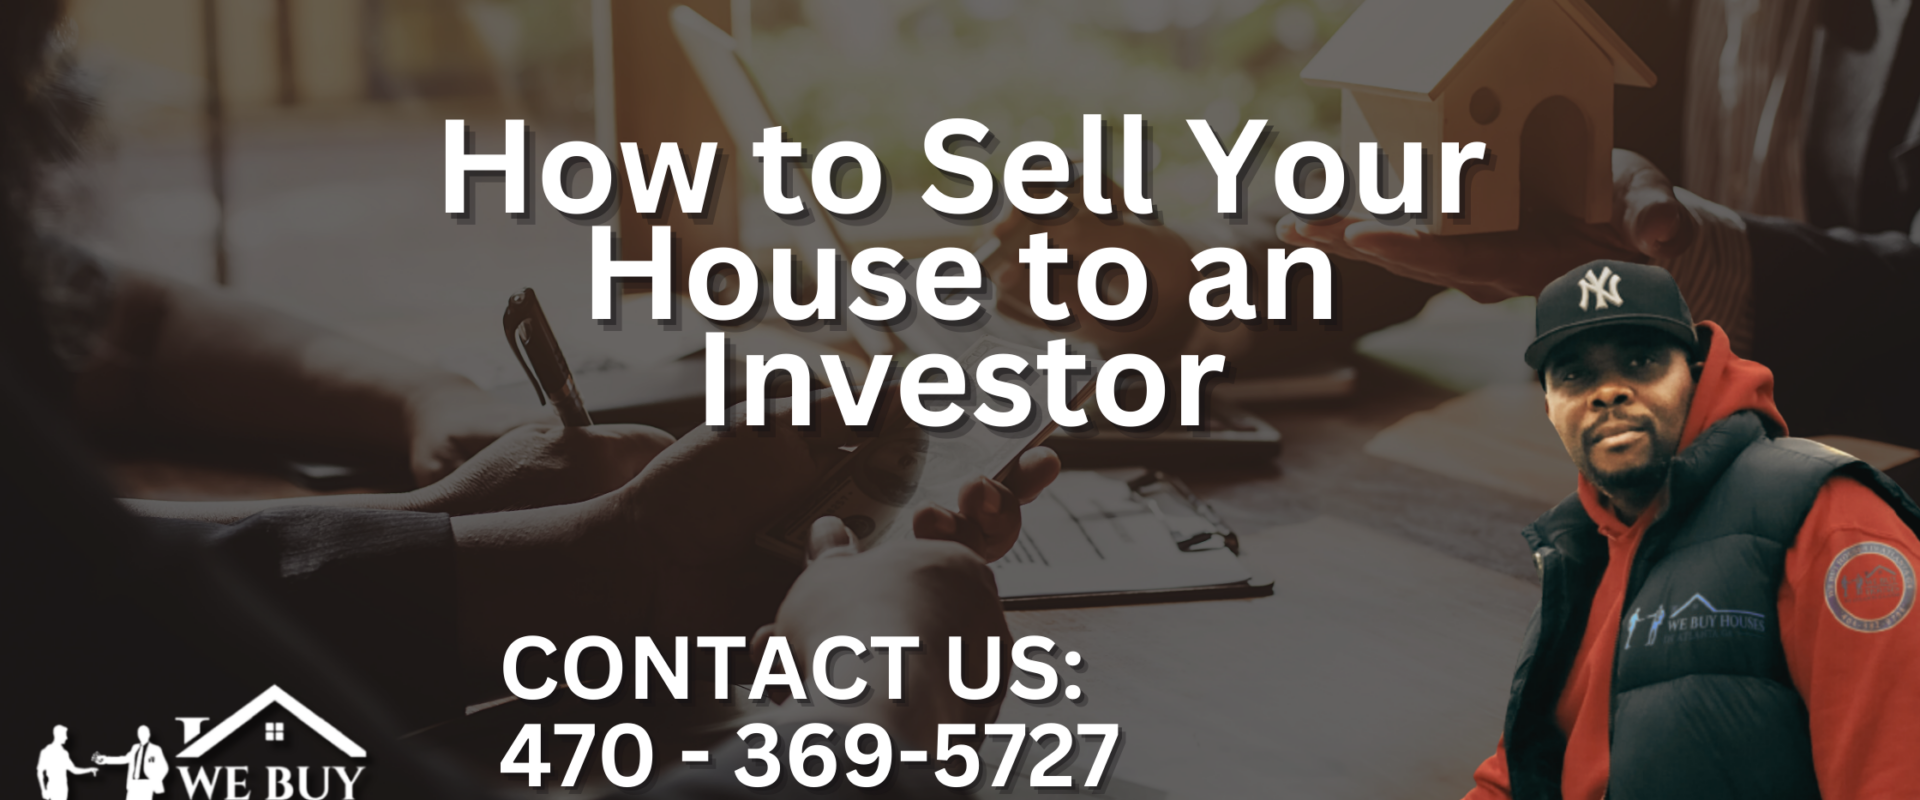 How-to-Sell-Your-House-to-an-Investor